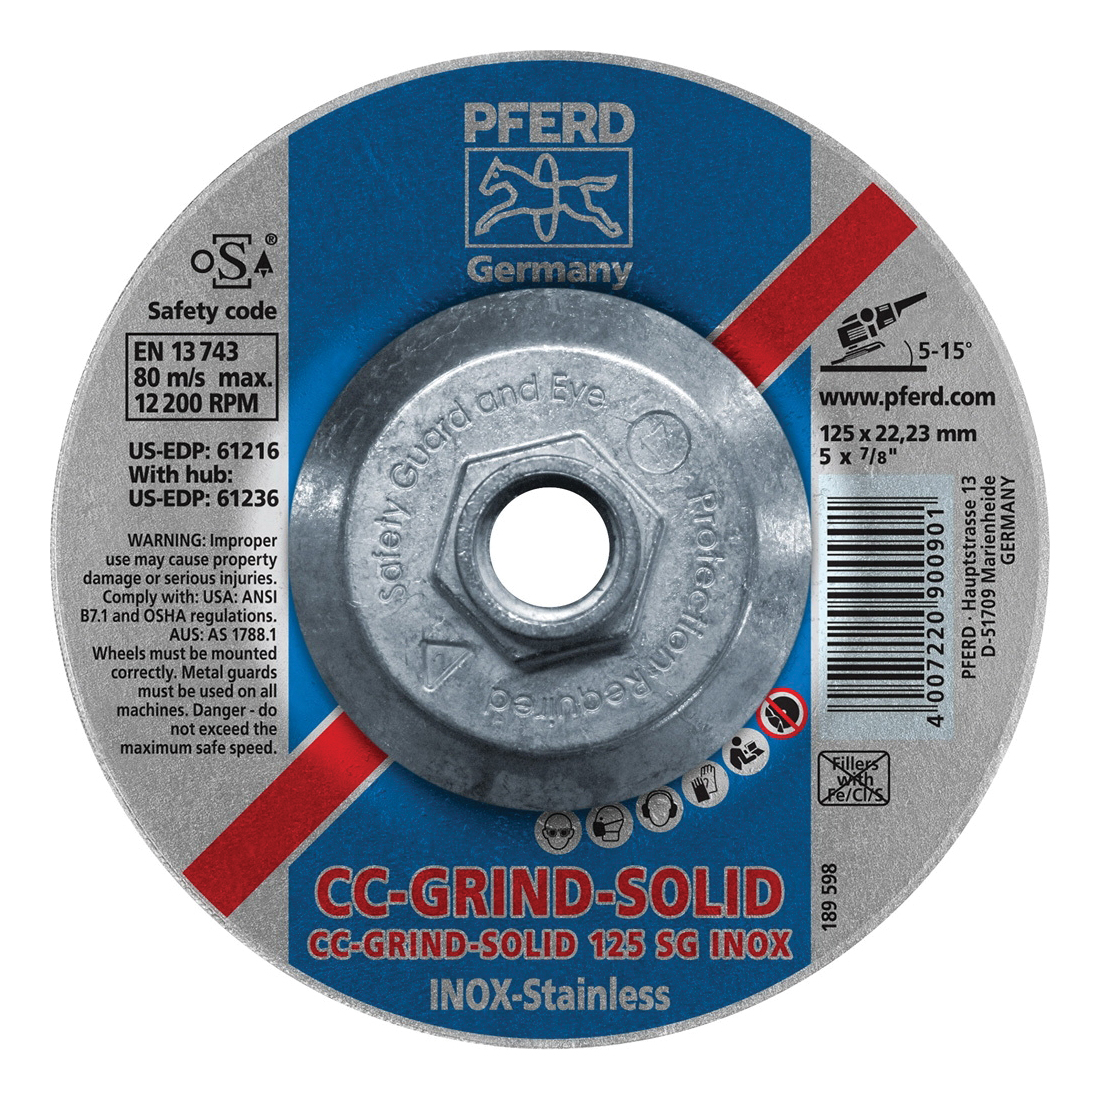 PFERD CC-GRIND®-SOLID Performance Line SG 61236 Threaded Coated Abrasive Disc, 5 in Dia